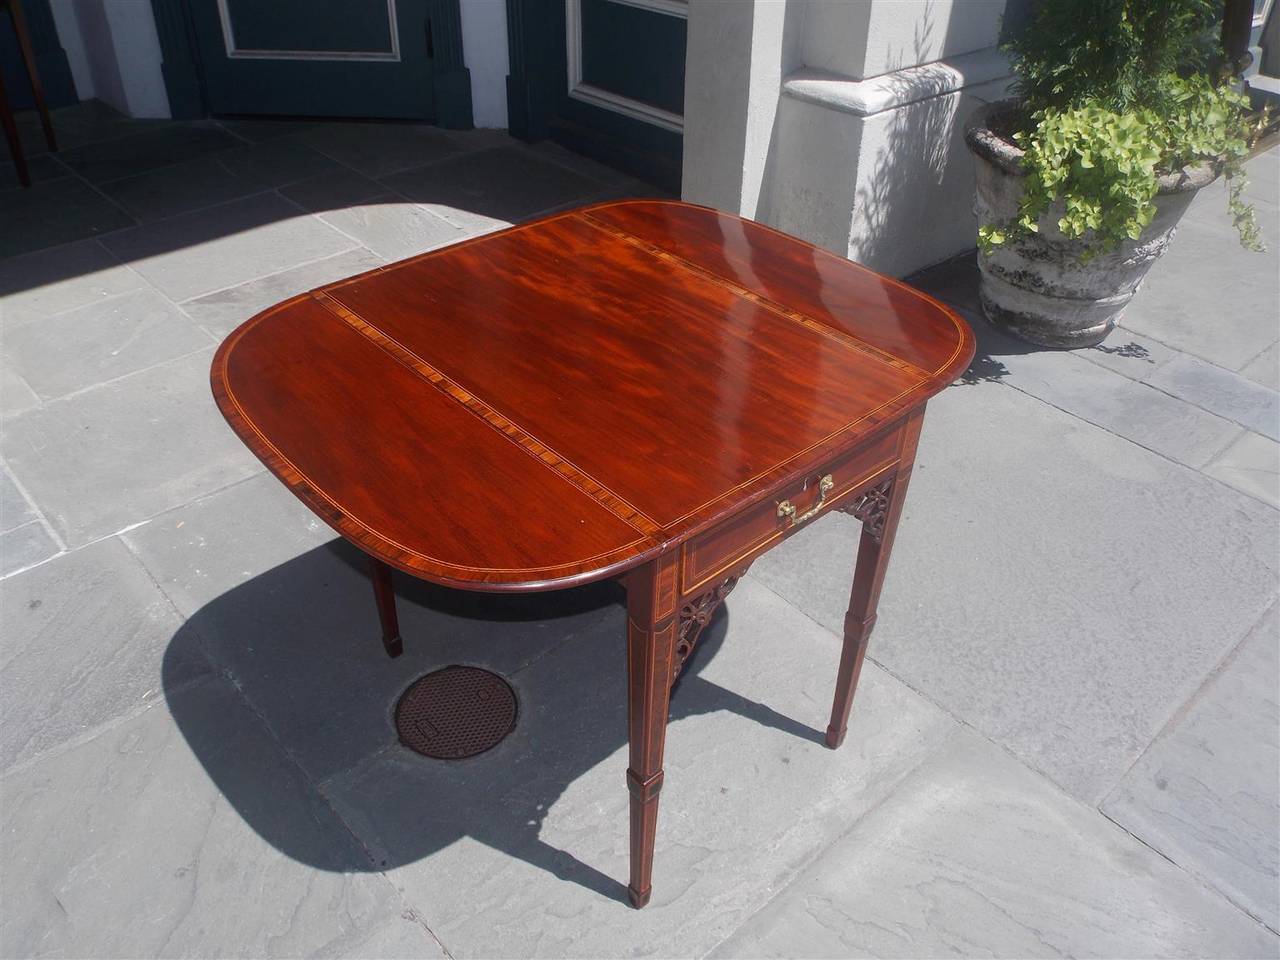 American mahogany and tulipwood one-drawer drop-leaf pembroke table with original brasses, carved corner fret work, satinwood string inlay, and terminating on tapered cuffed burled inlaid squared legs, VA, Late 18th century. Table is 37.75